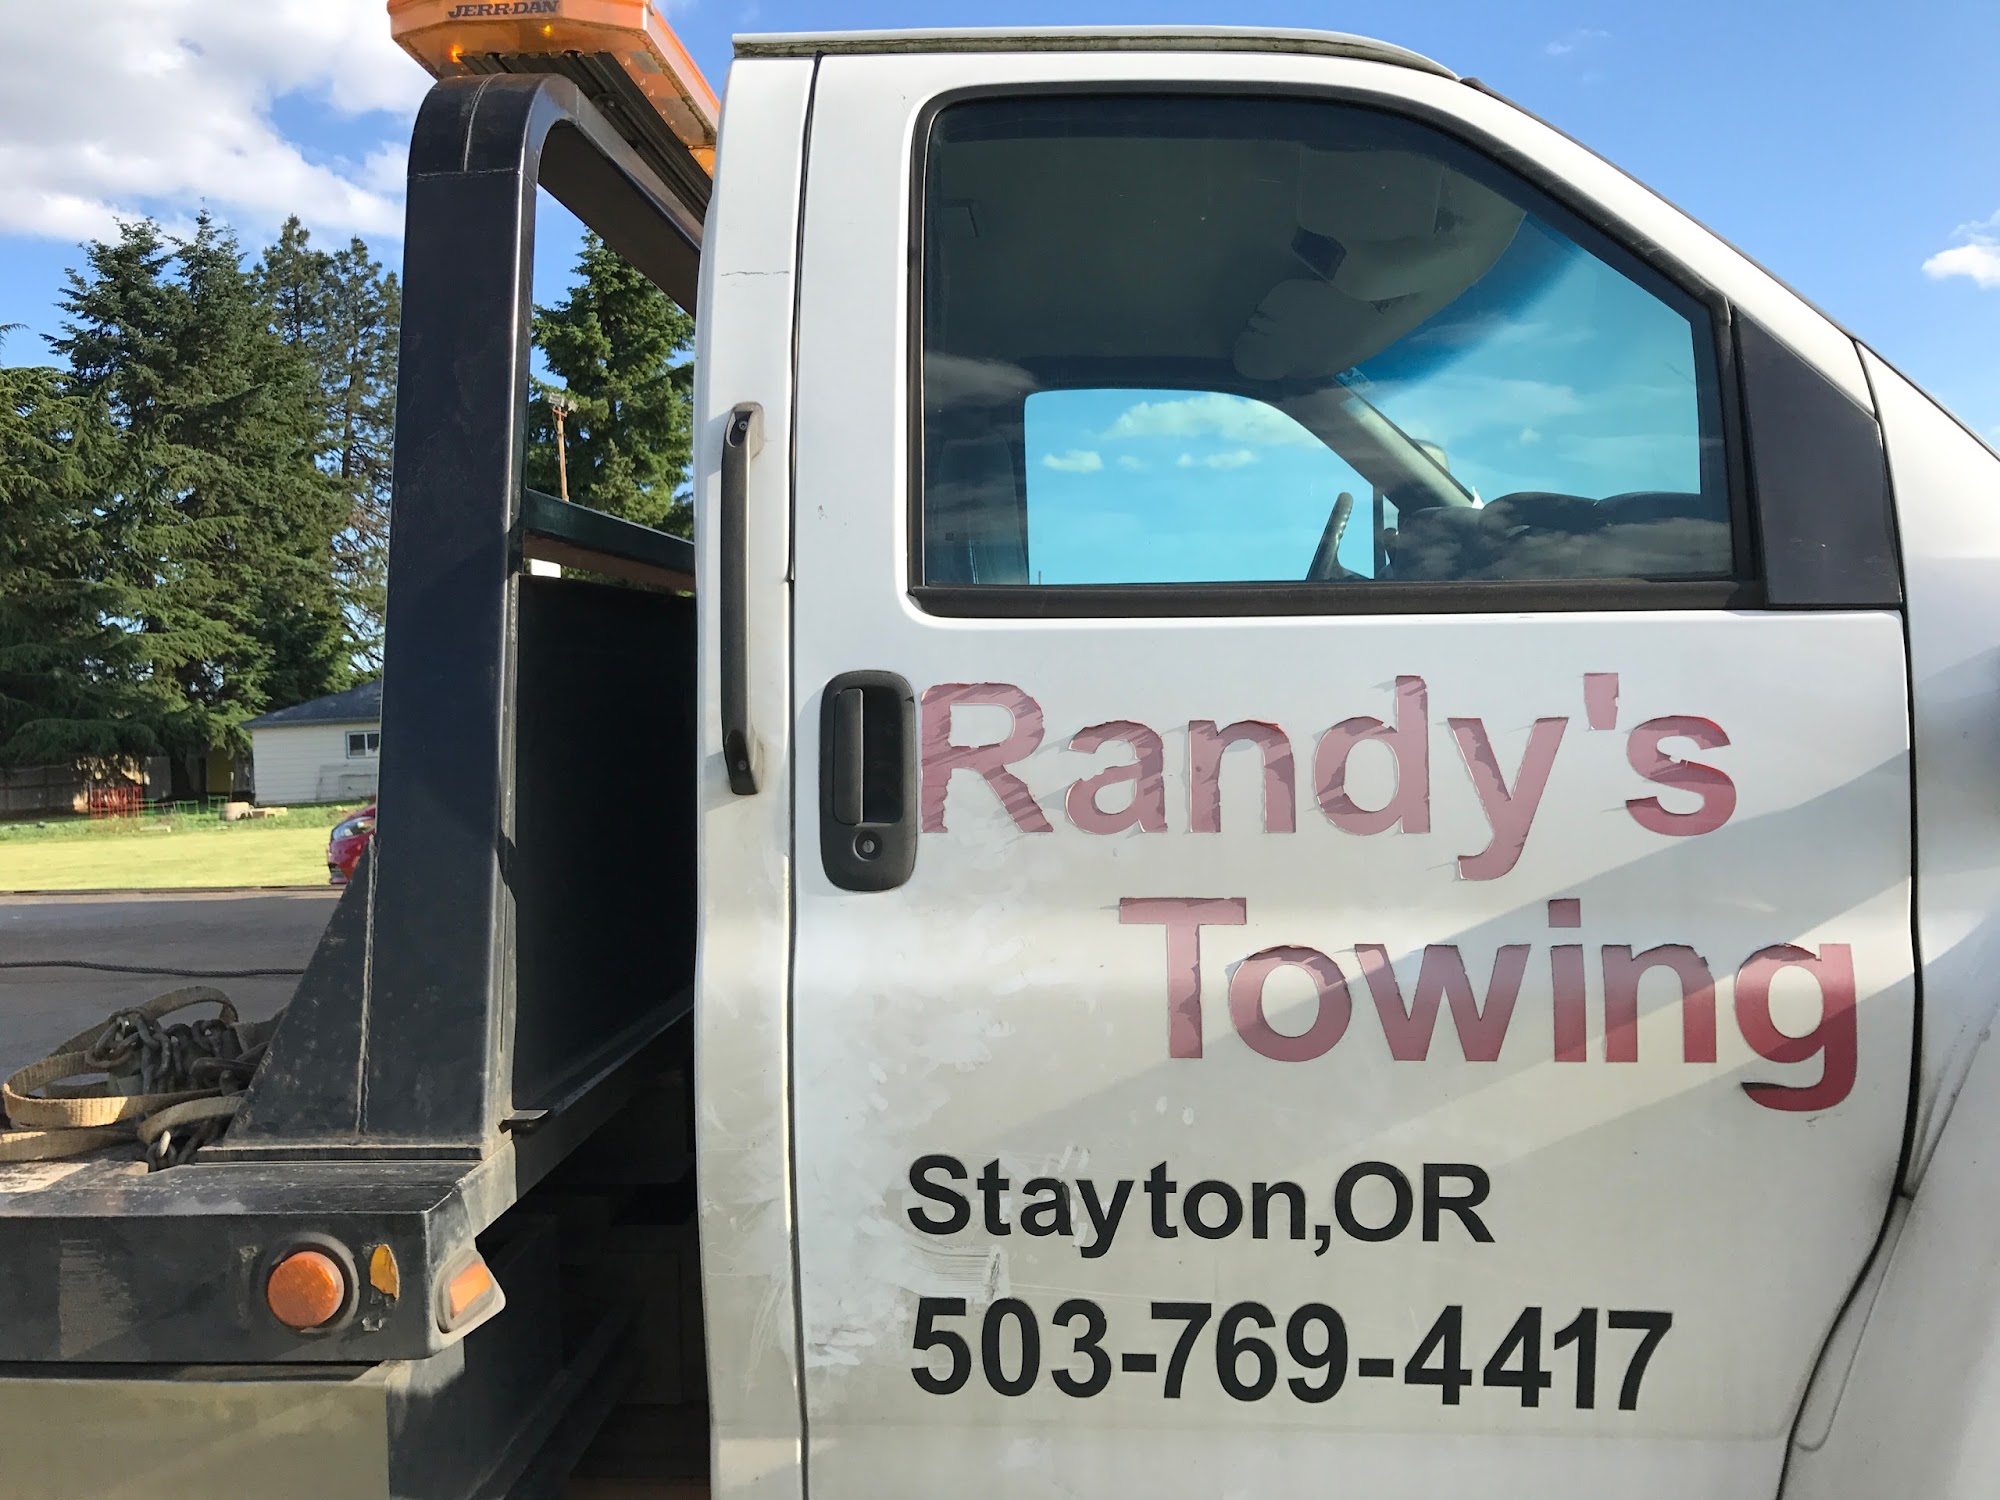 Randy's Towing Service 925 Wilco Rd, Stayton Oregon 97383